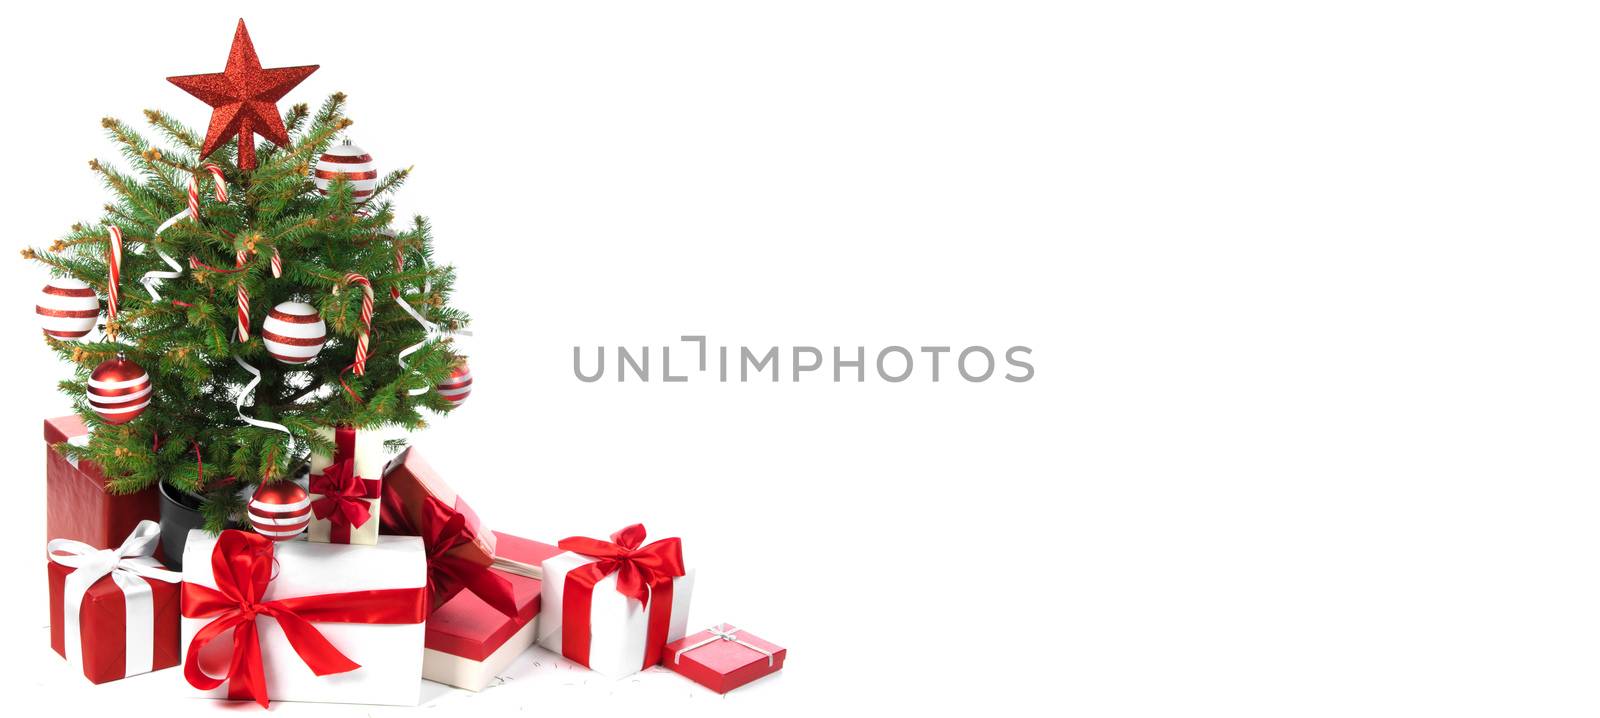 Decorated Christmas tree with gift boxes isolated on white background